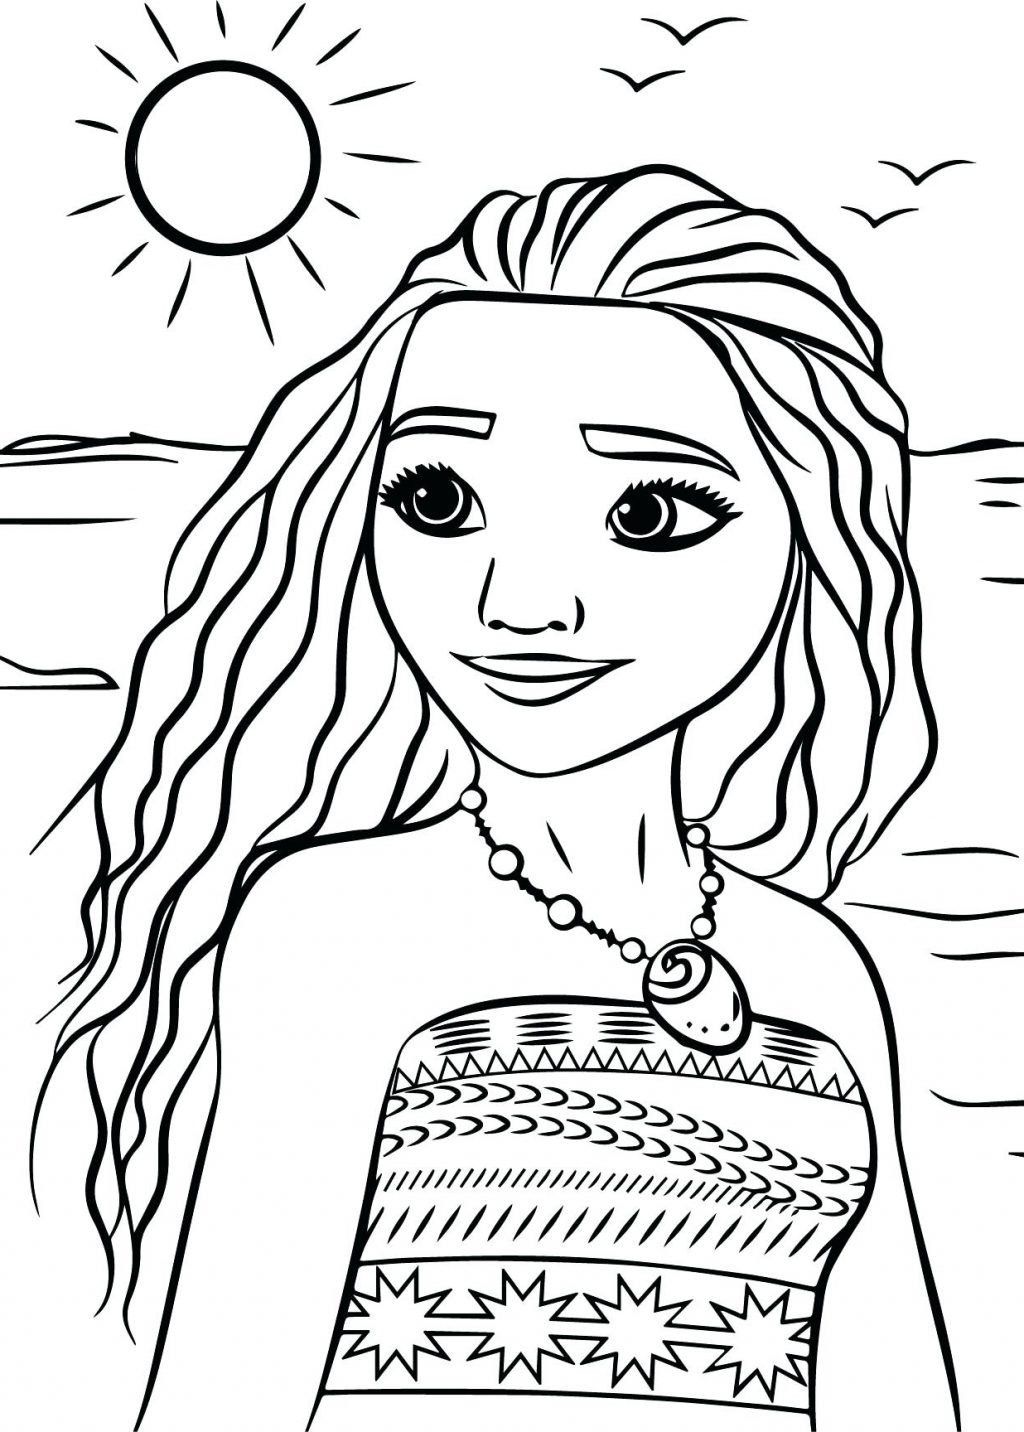 Moana coloring pages pdf disney coloring pages pdf aqh disney coloring pages pdf best of